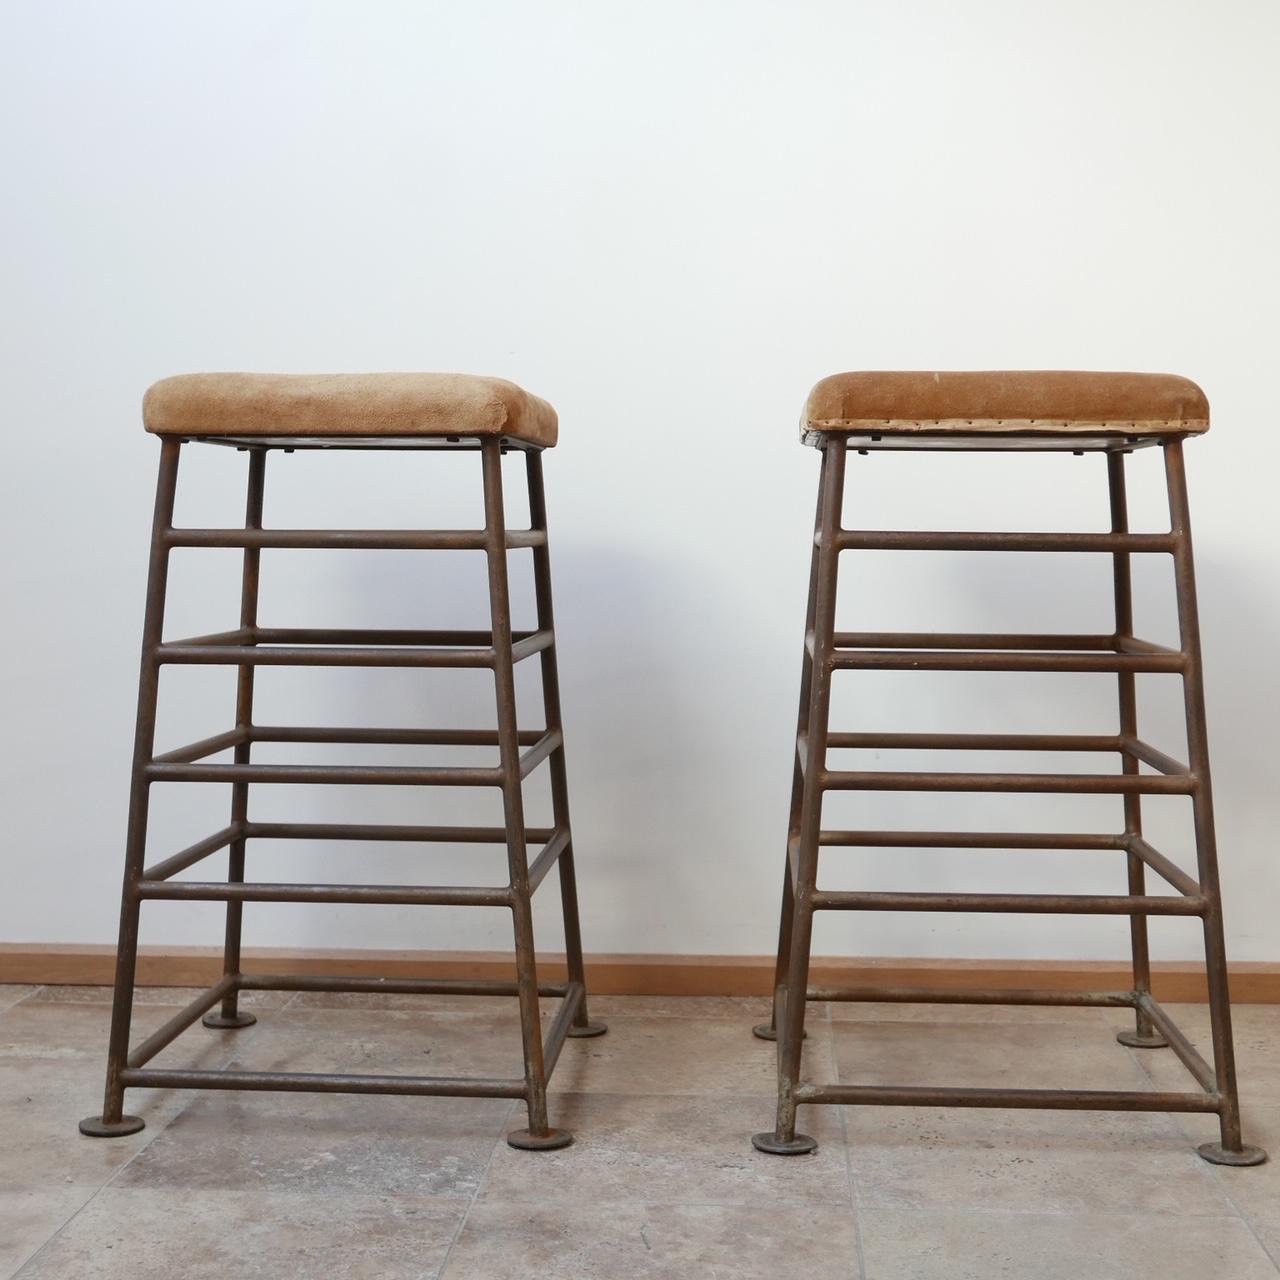 Pair of Tall English Gym Bench Stools 2